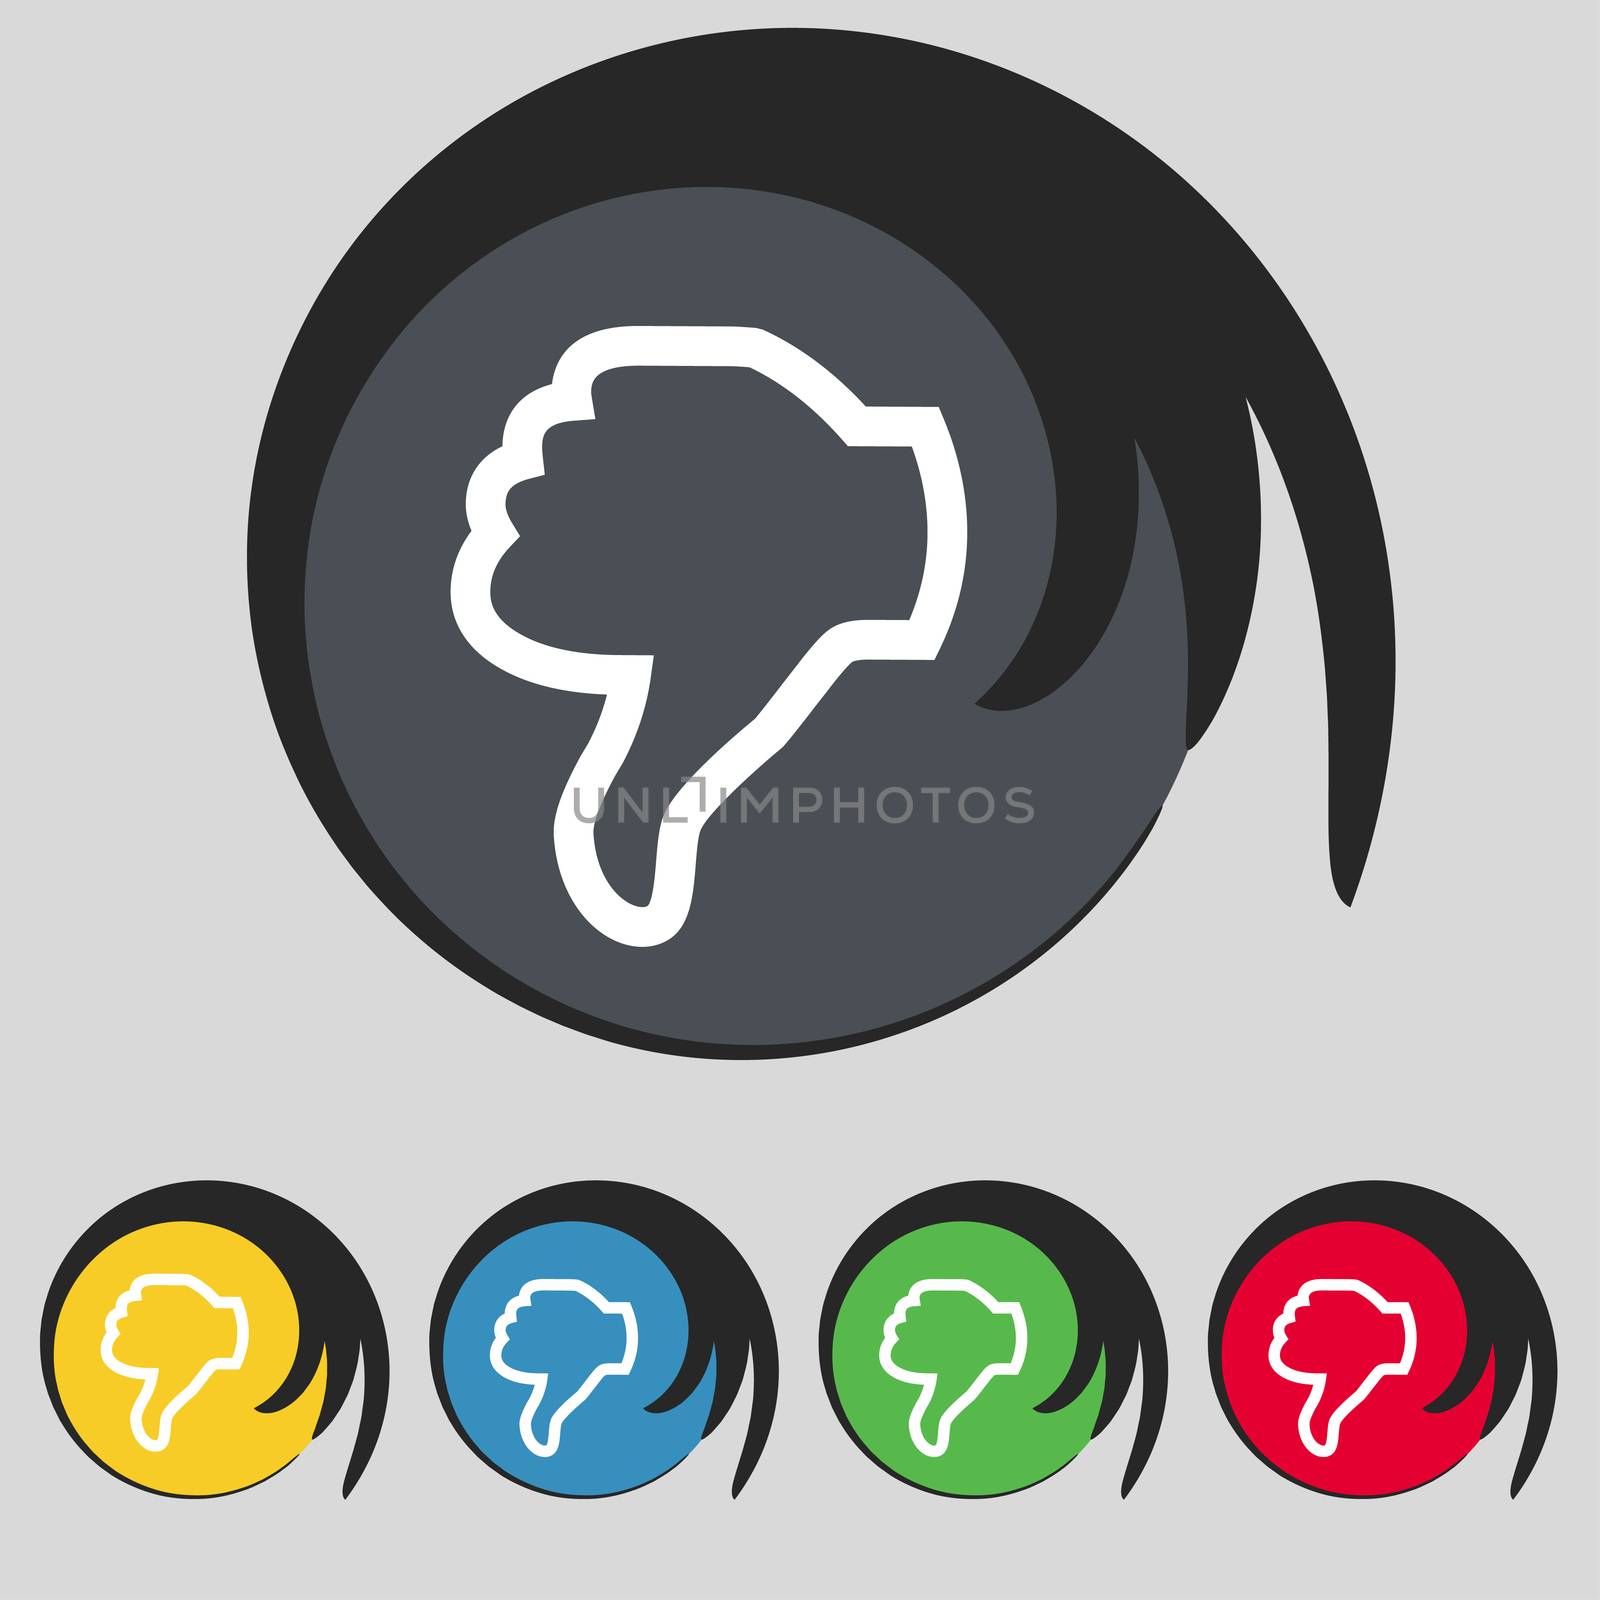 Dislike sign icon. Thumb down sign. Hand finger down symbol. Set of colored buttons. illustration